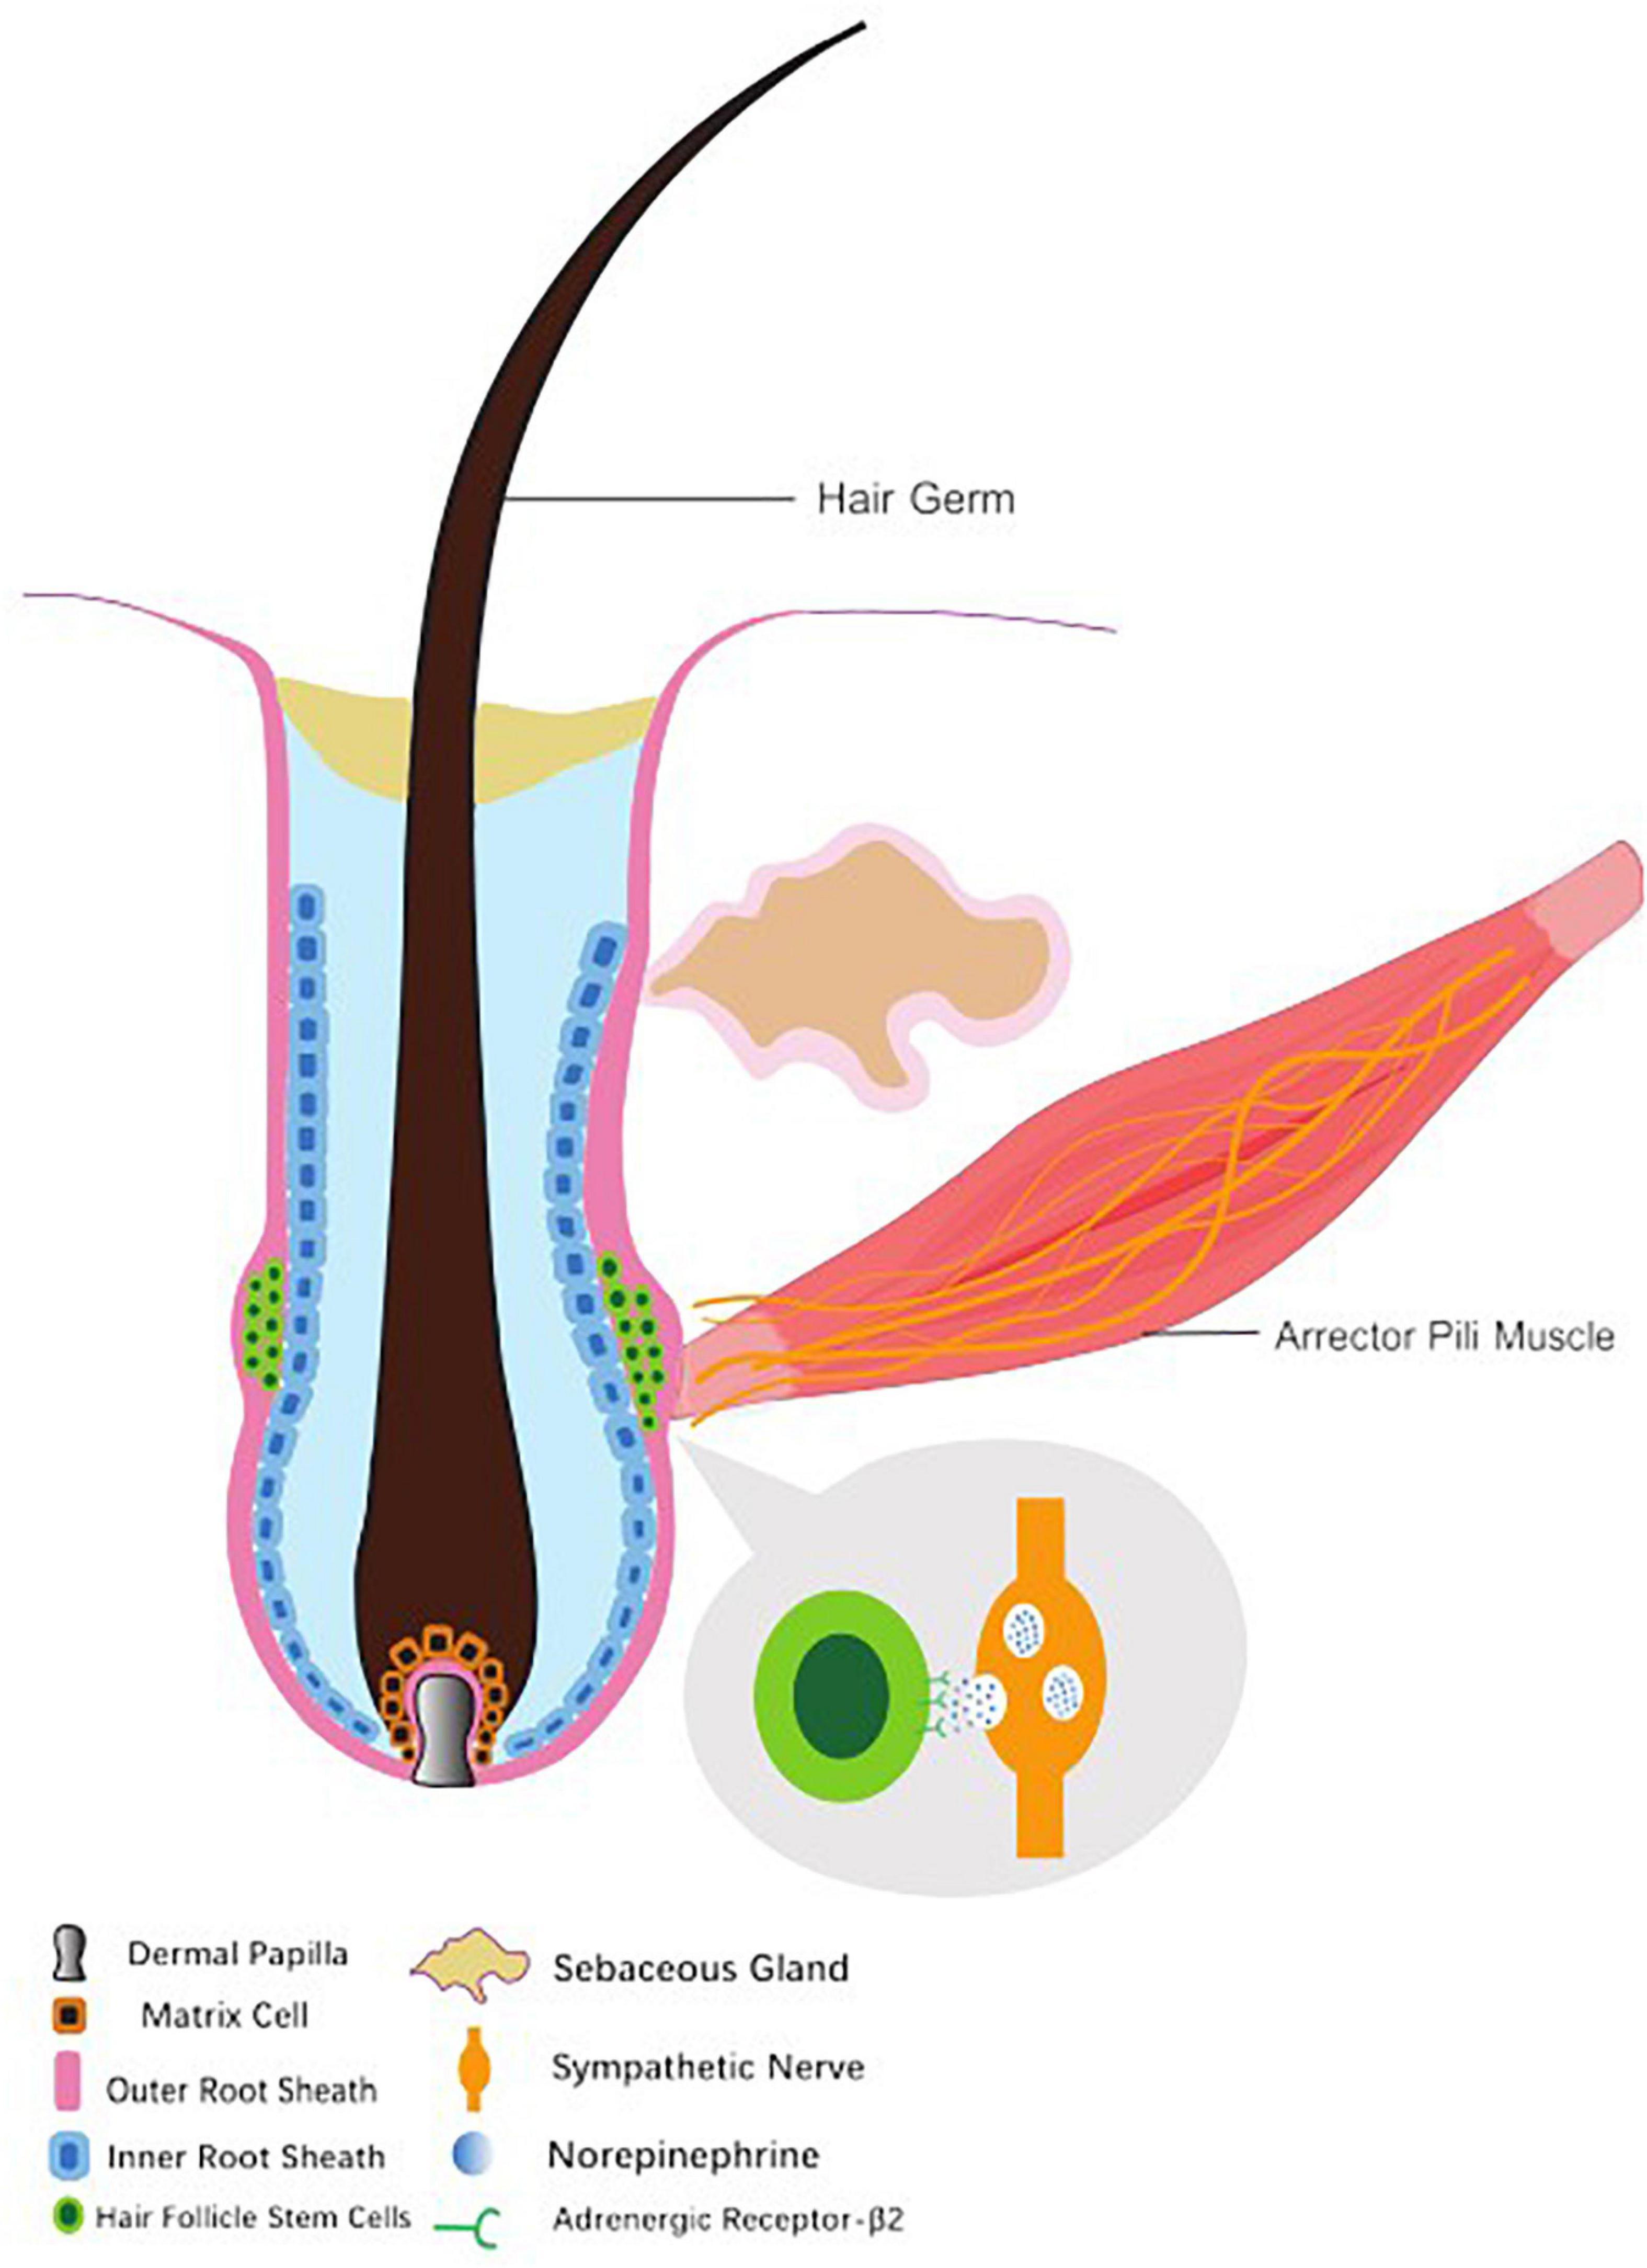 Hair Follicles  Introduction To Hair Follicles And The Science Of Hair   HairKnowHowCom Professional Hair Testing Services  Hair Clinics  Trichologists  Private Clients